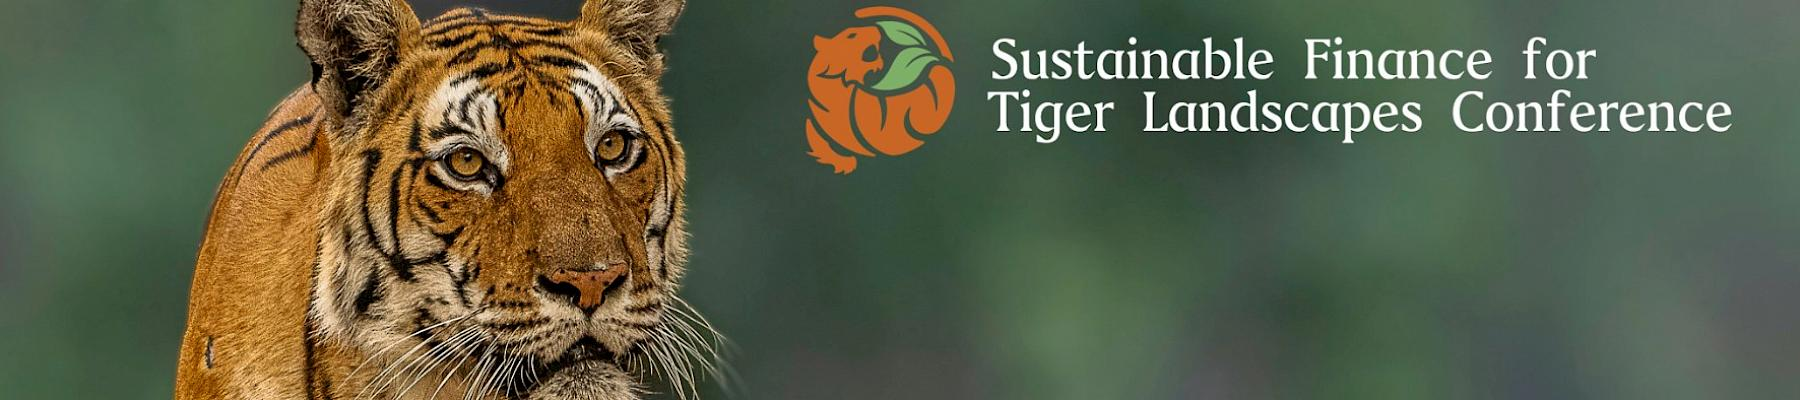 Sustainable Finance for Tiger Landscapes Conference 